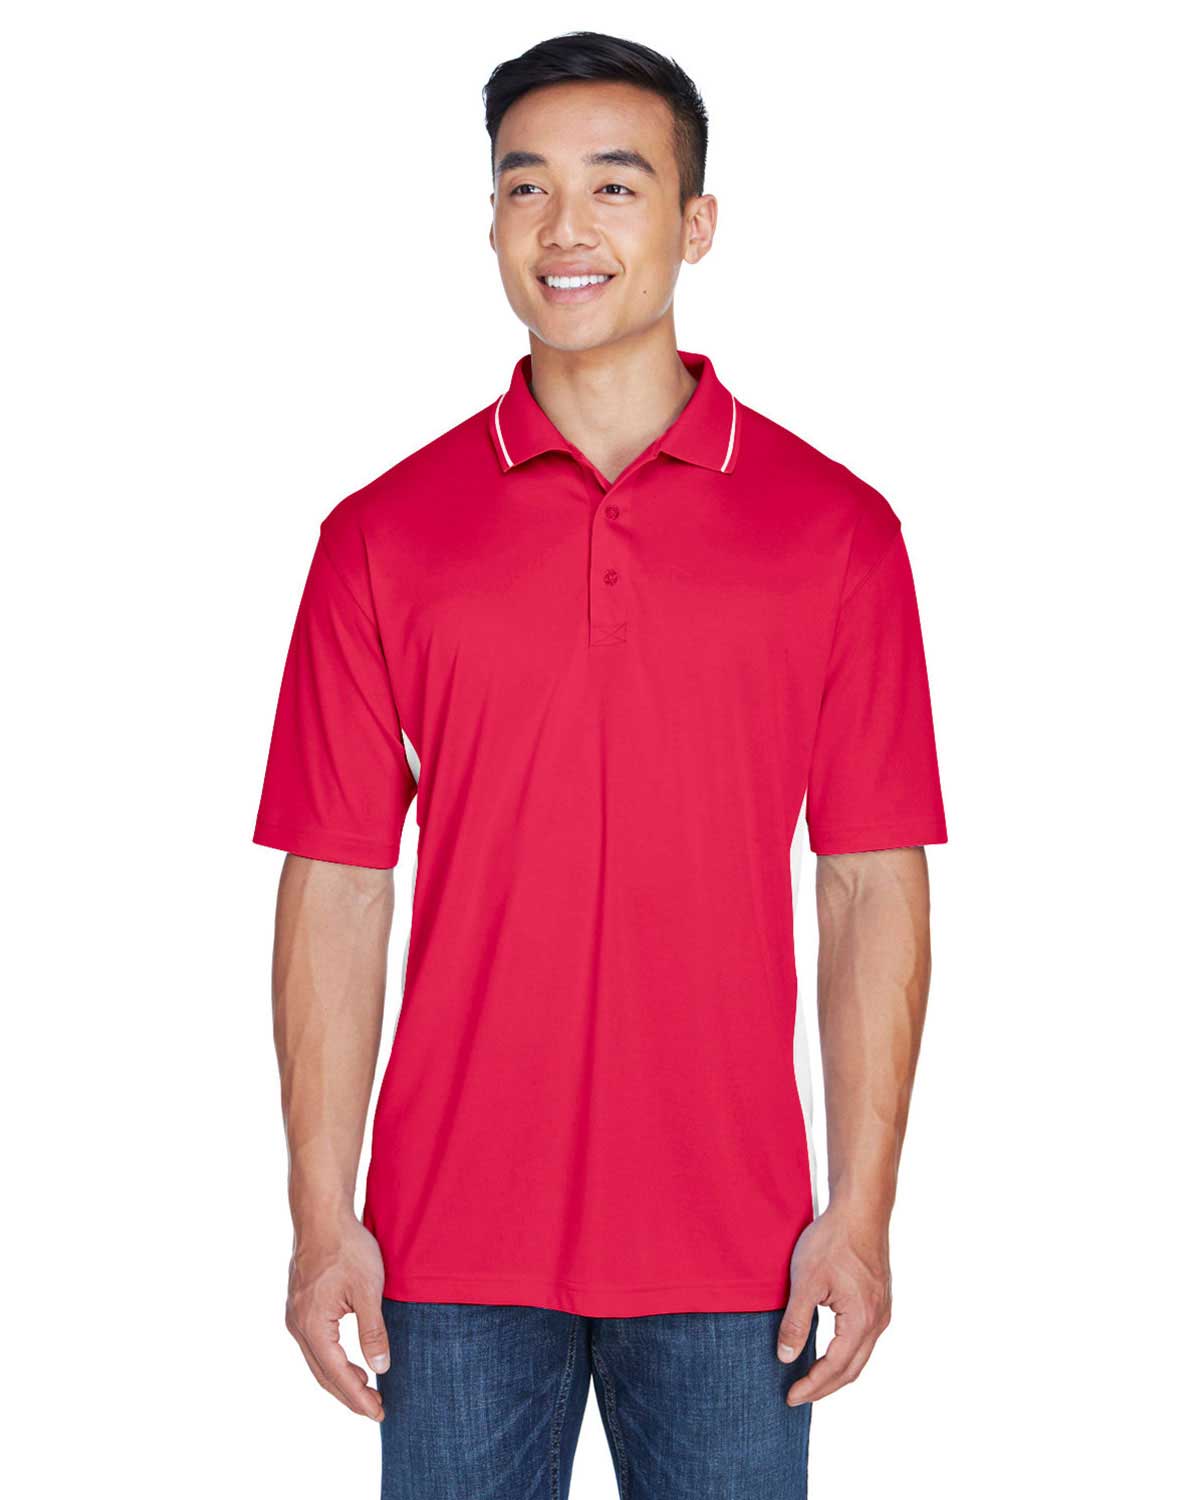 UltraClub 8406 Men Cool & Dry Sport 2-Tone Polo at Apparelstation